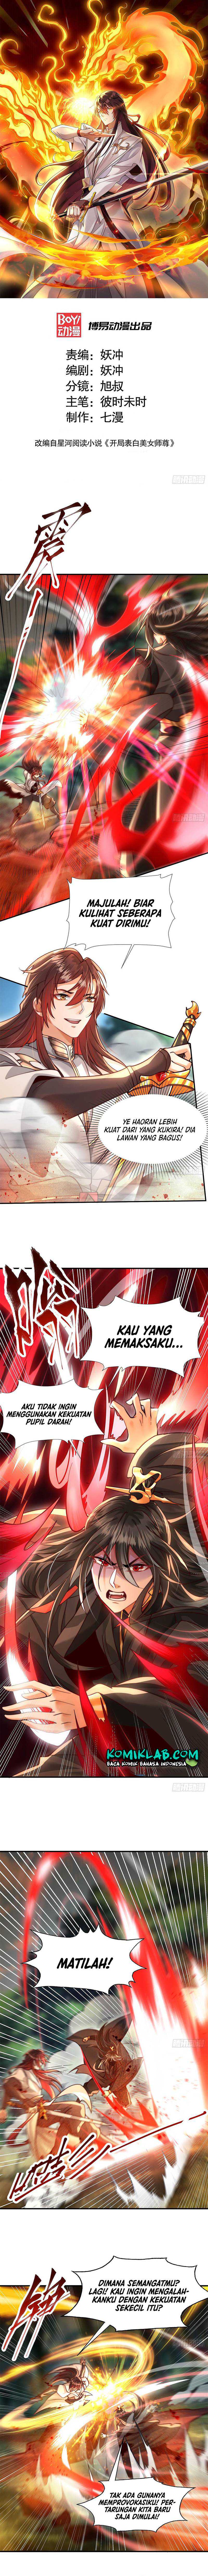 Starting With Confessing With the Beautiful Master Chapter 10 bahasa Indonesia